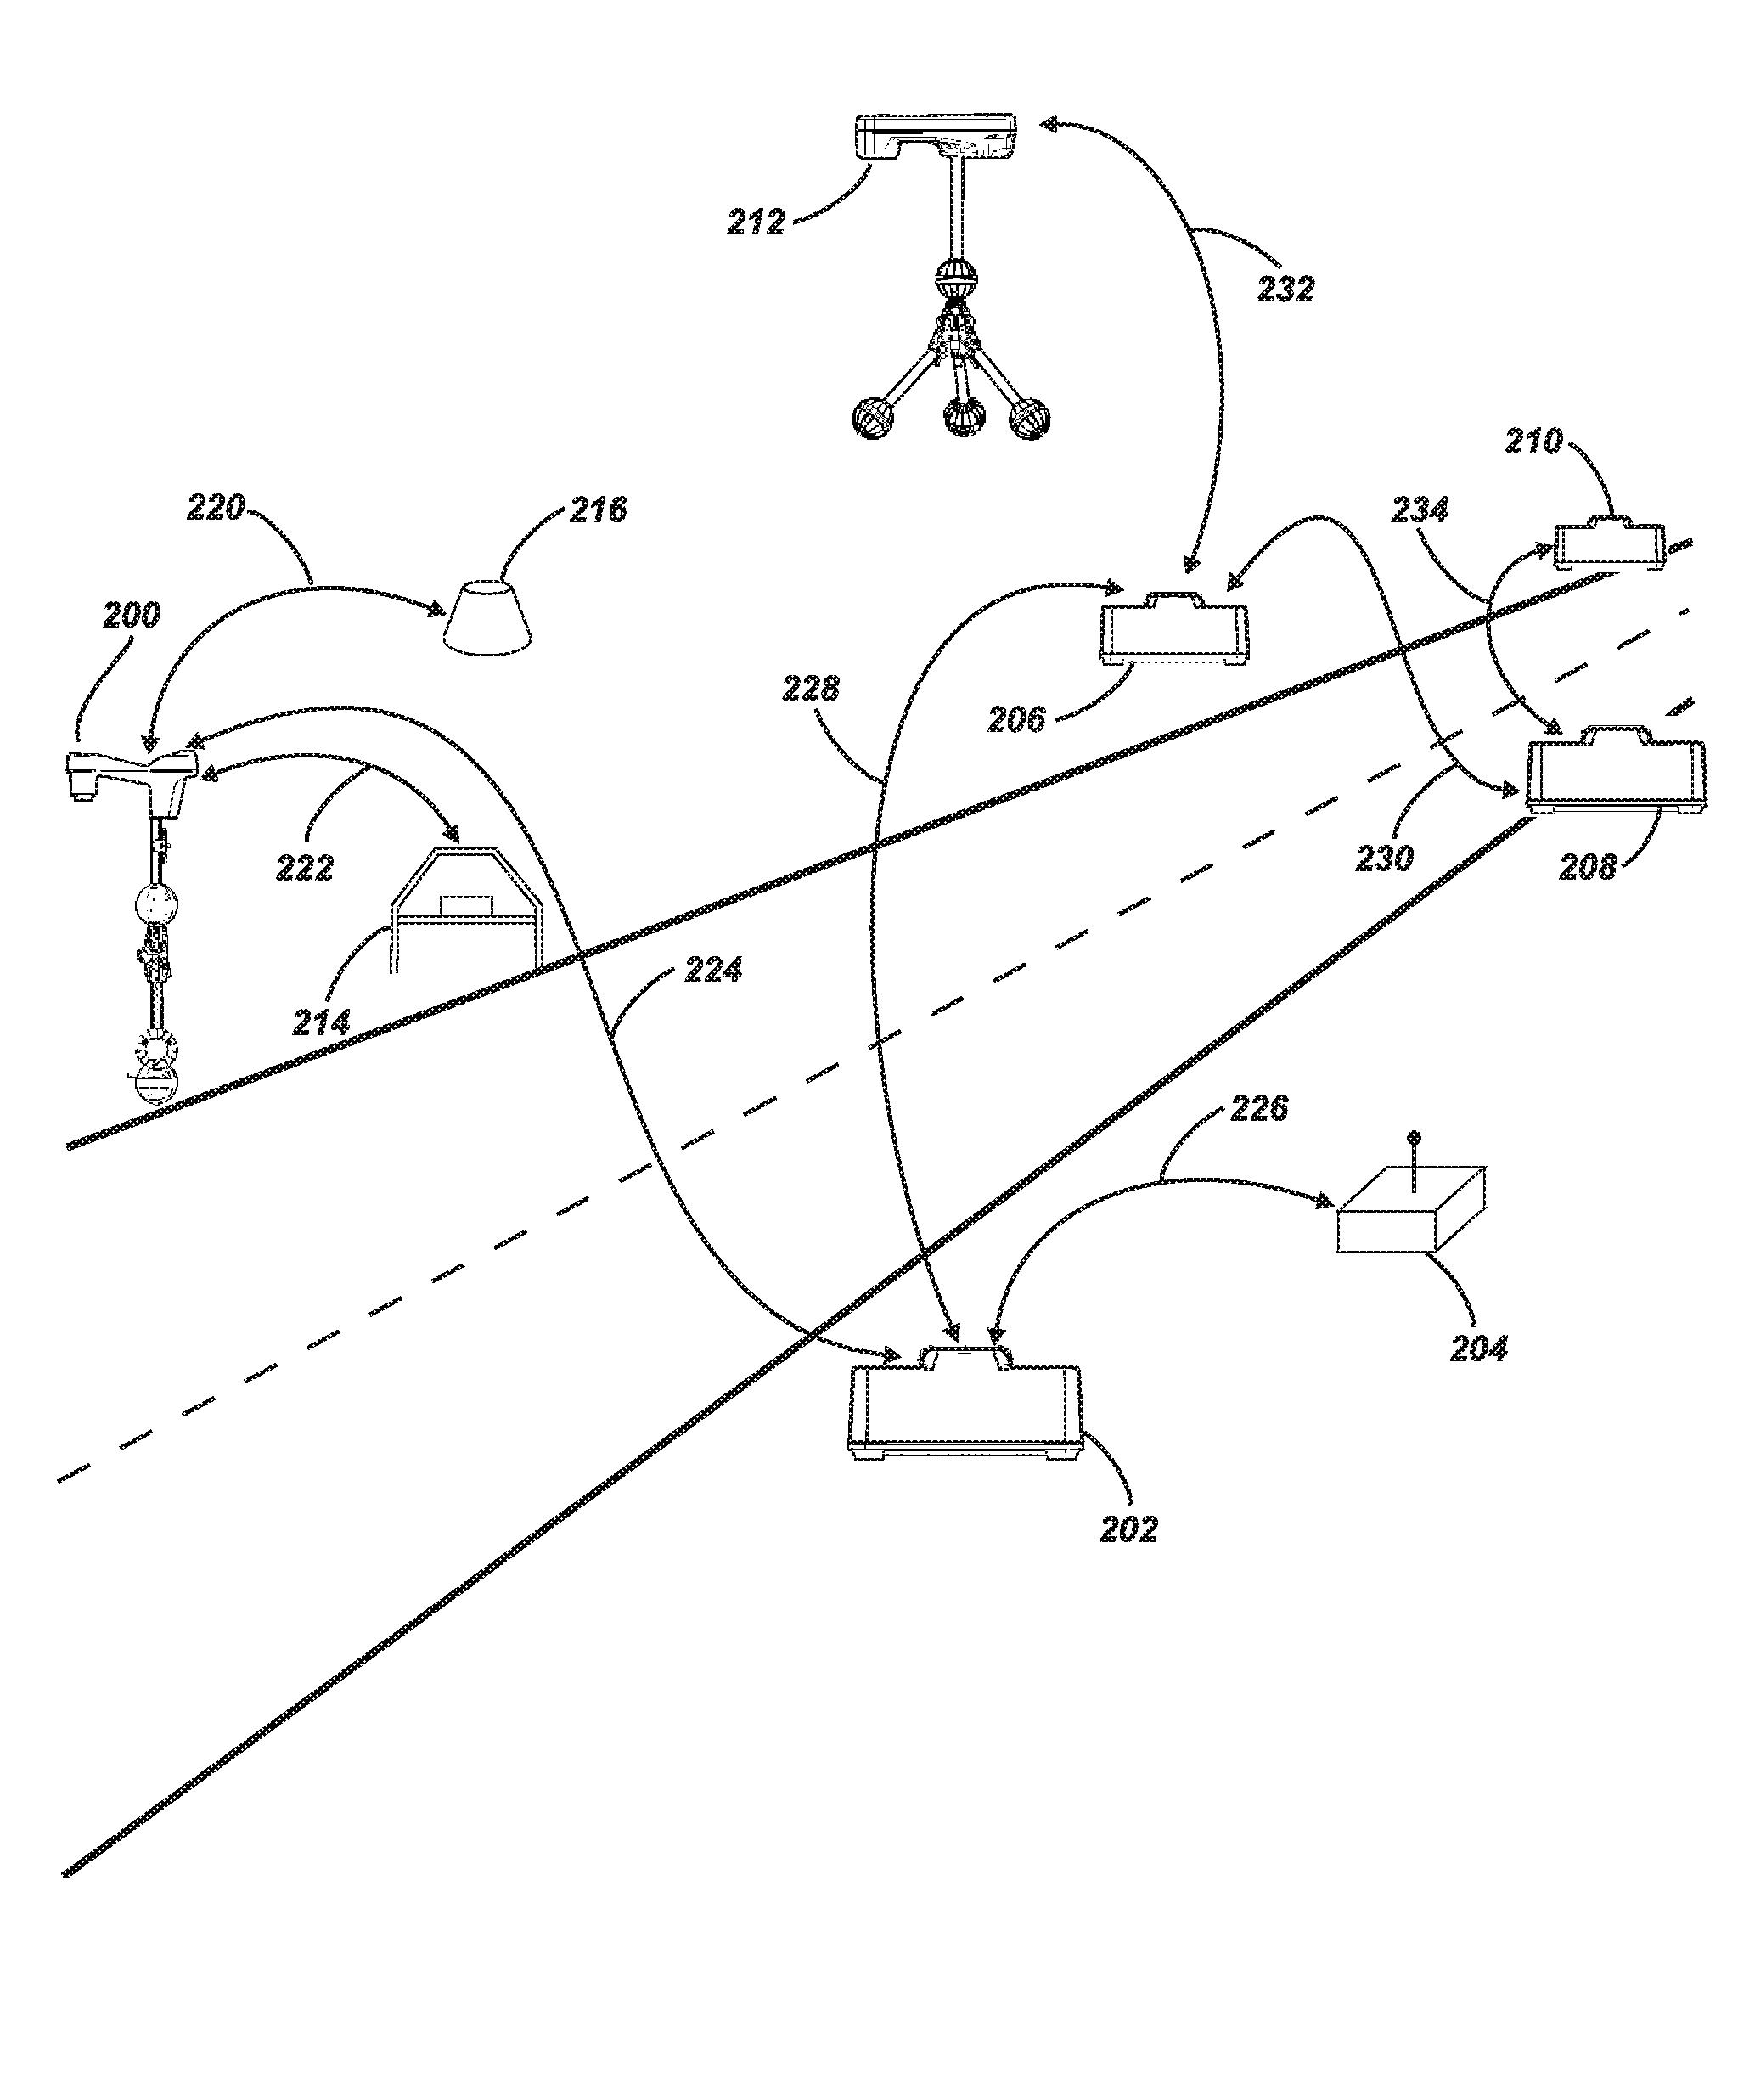 System and method for locating buried pipes and cables with a man portable locator and a transmitter in a mesh network